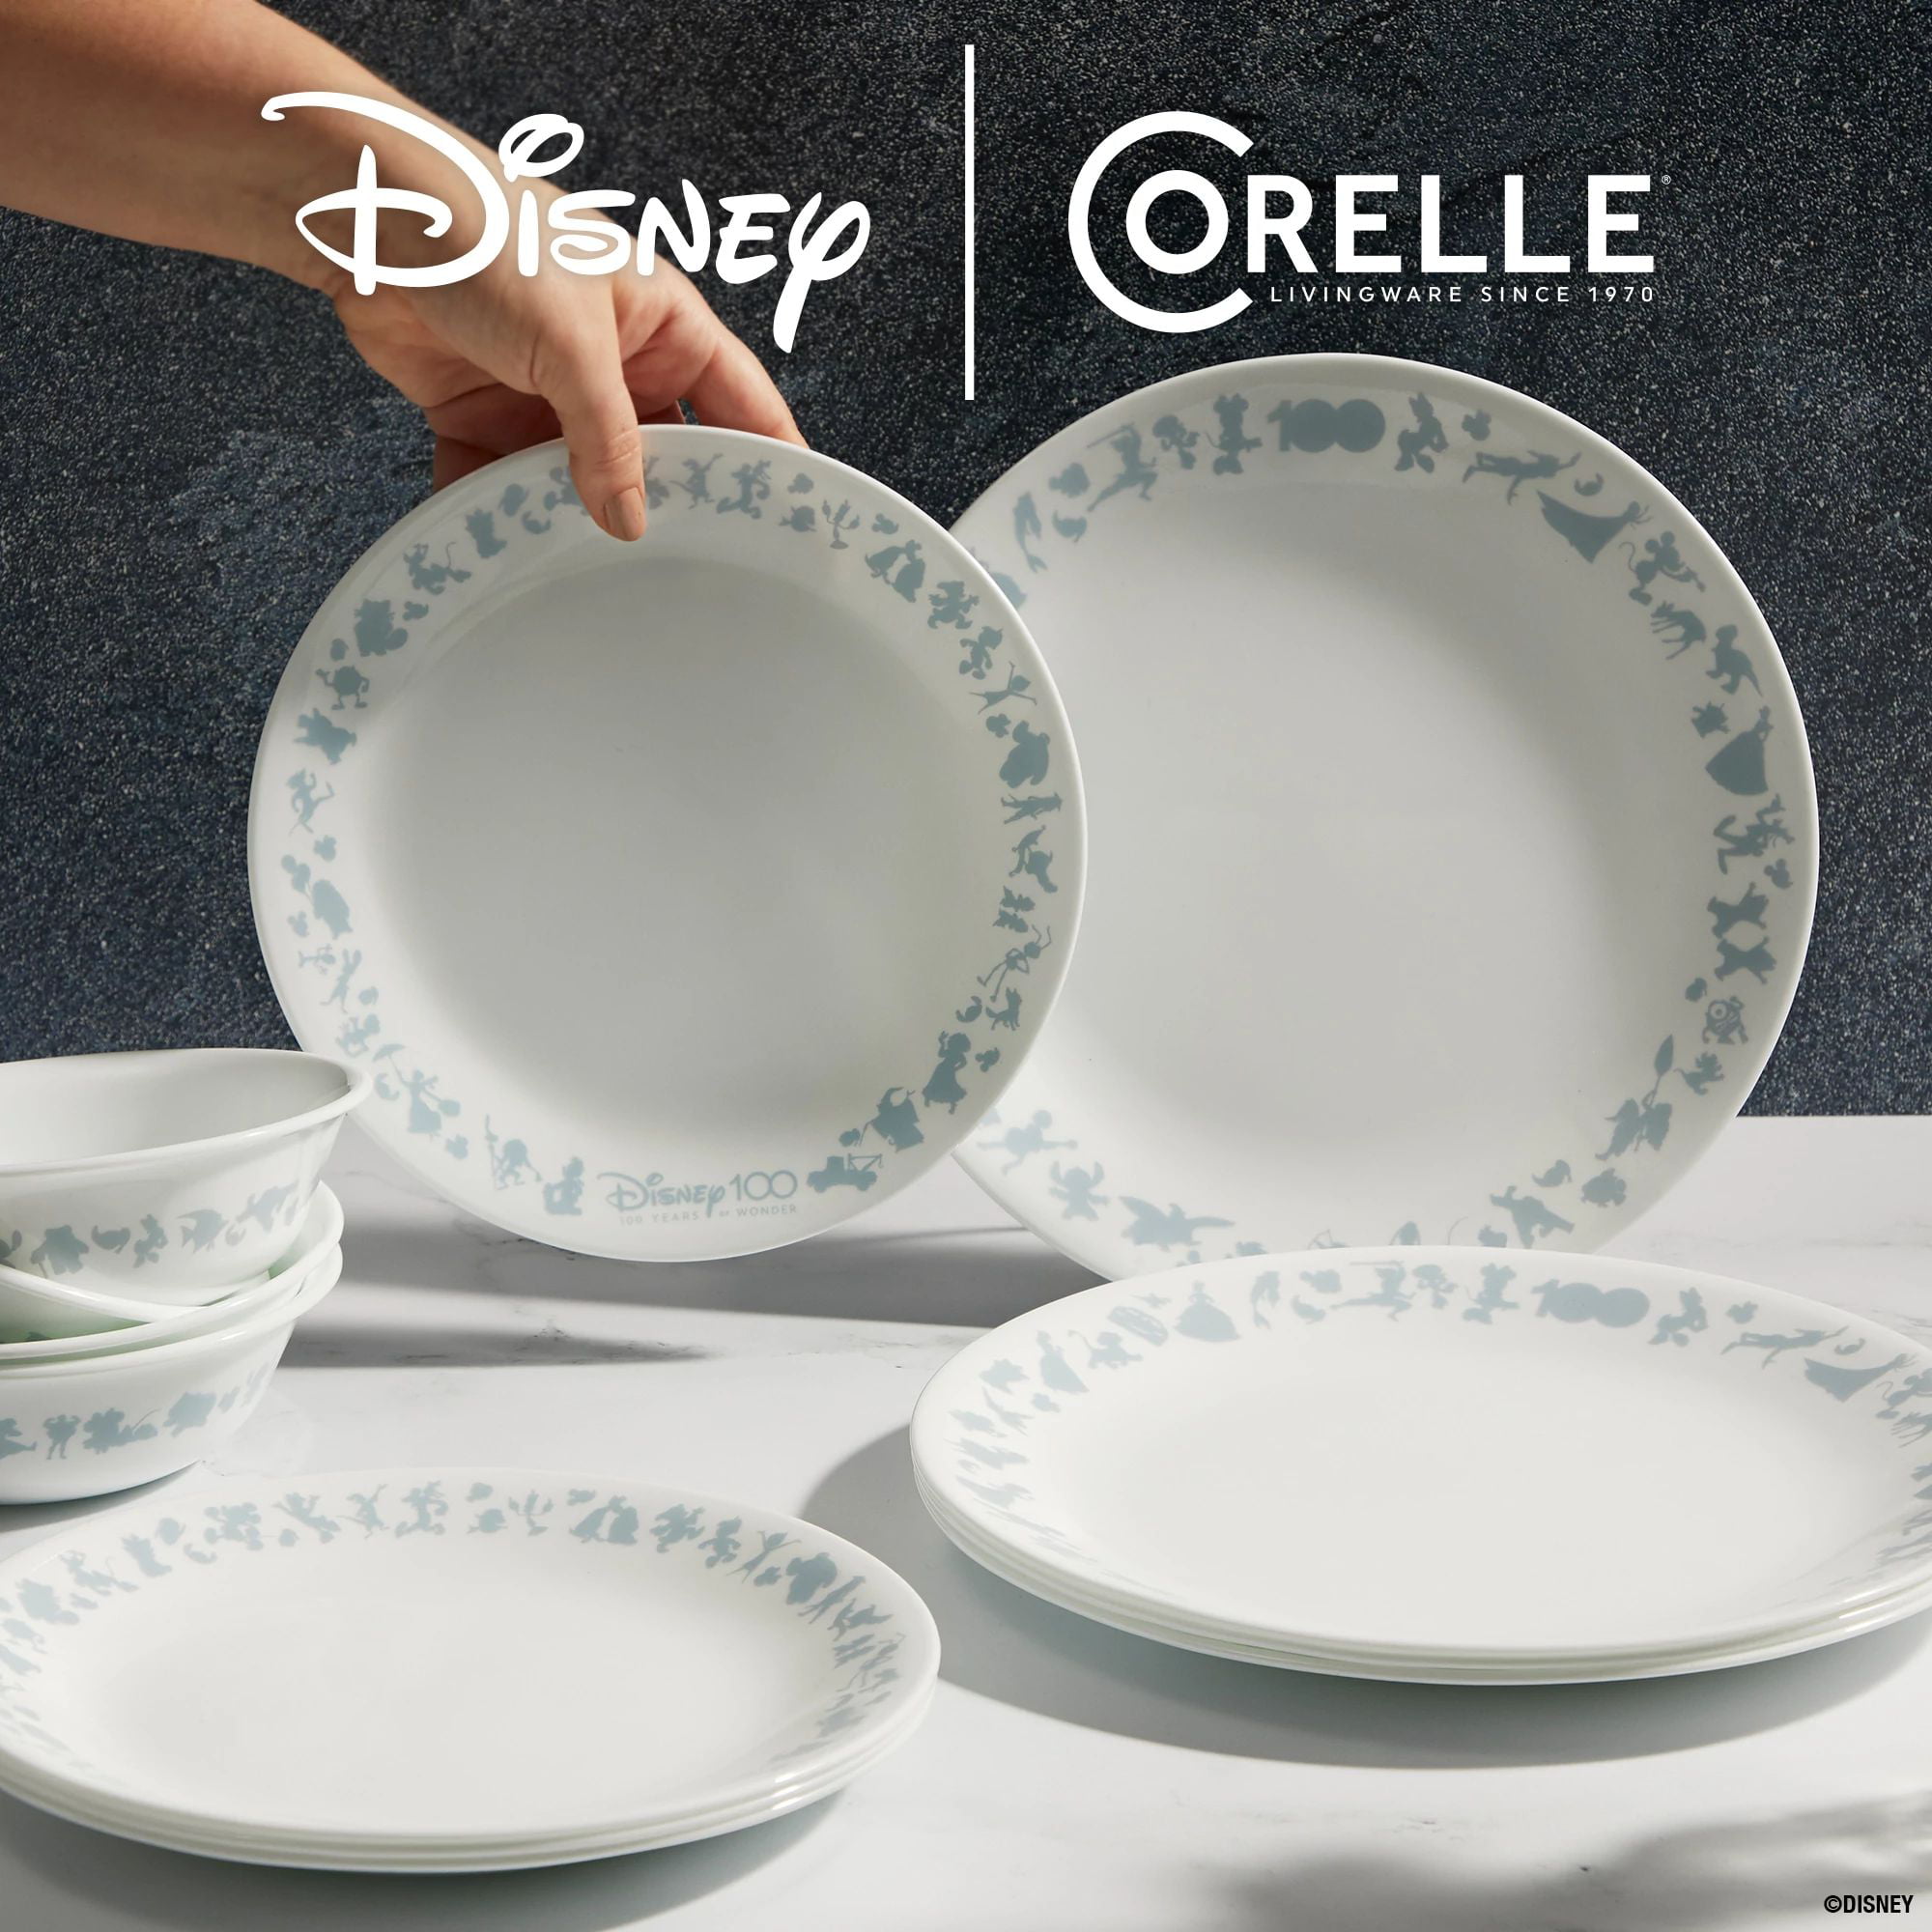 Corelle - It's NEW Disney The Nightmare Before Christmas